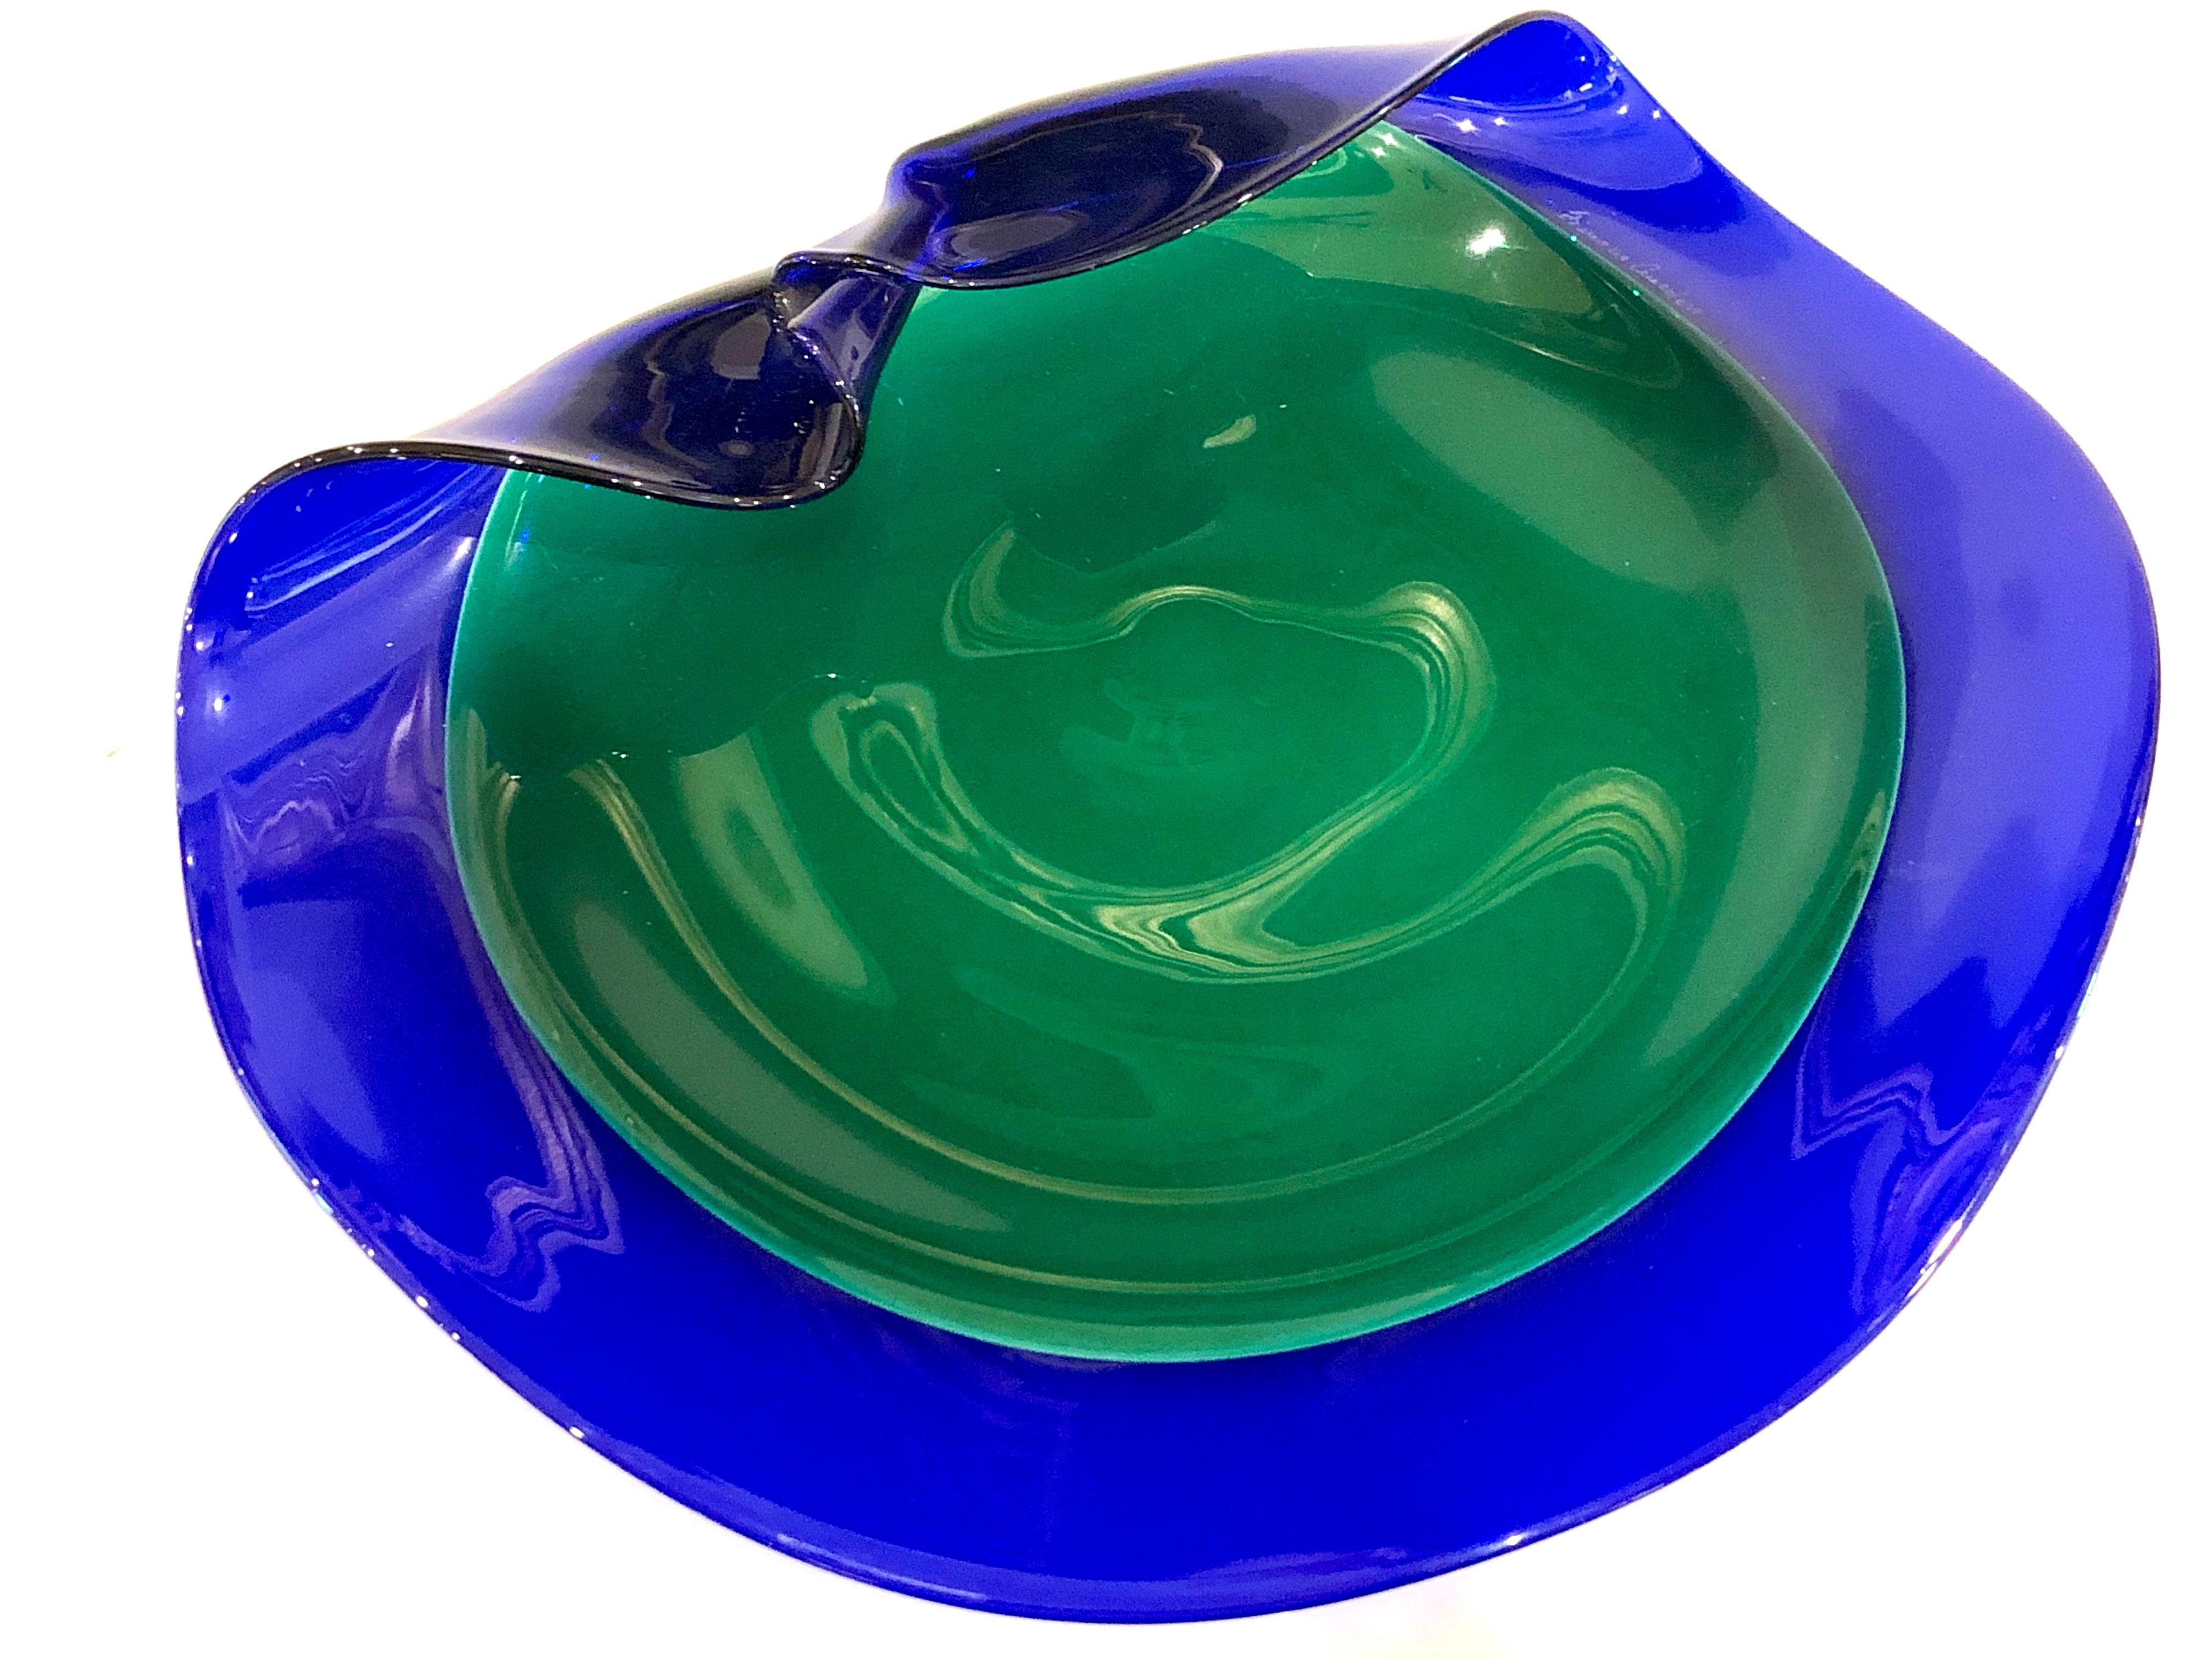 Handmade Signed Italian Center Free Form Bowl by Simone Cenedese Murano In Excellent Condition For Sale In San Diego, CA